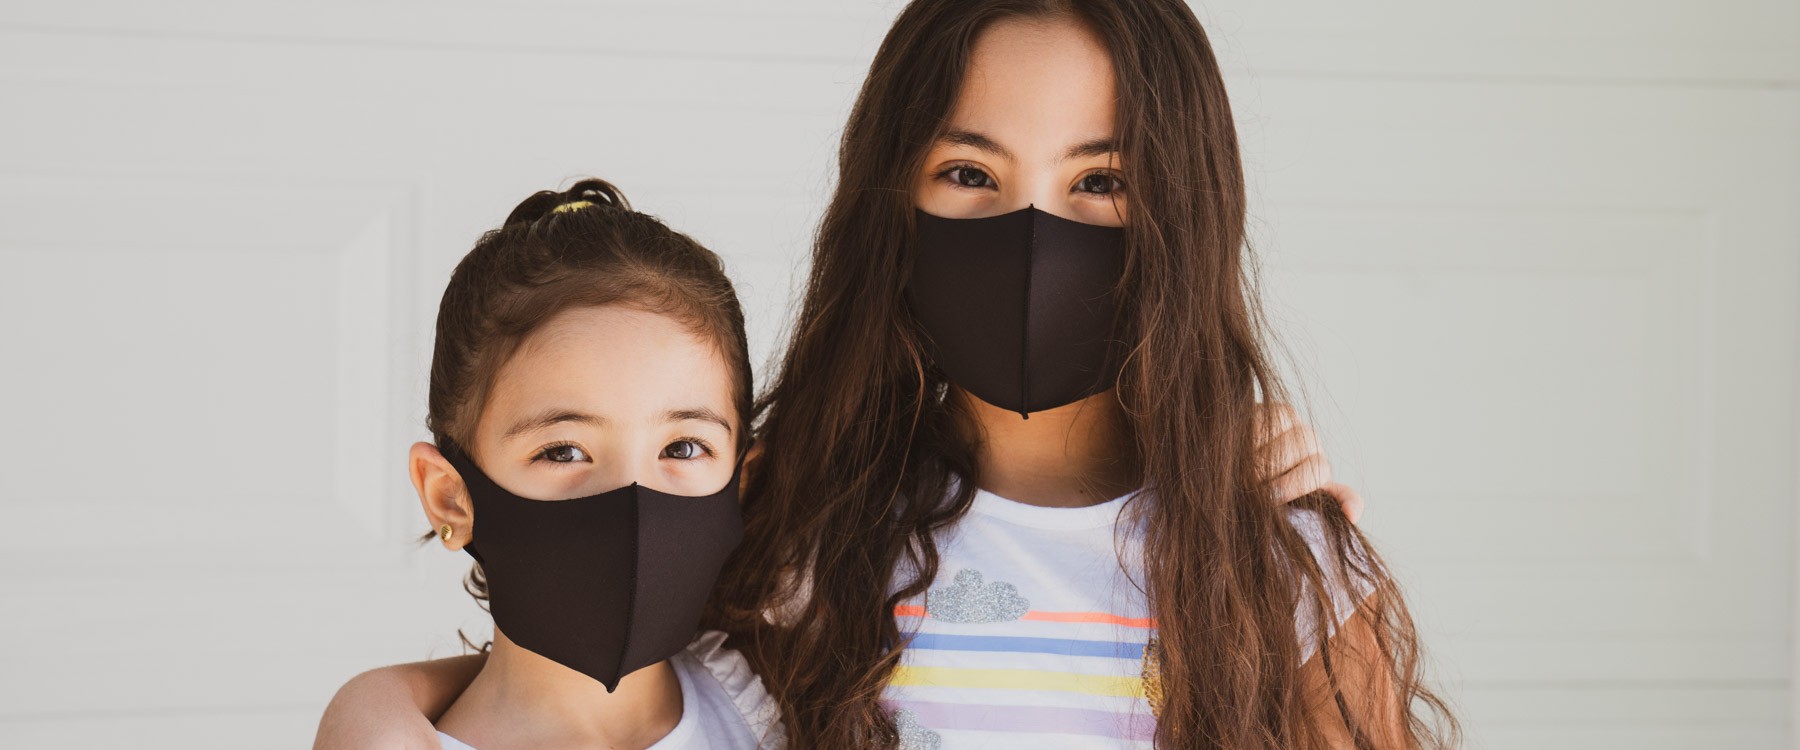 Two girls with mask looking happily side-by-side together